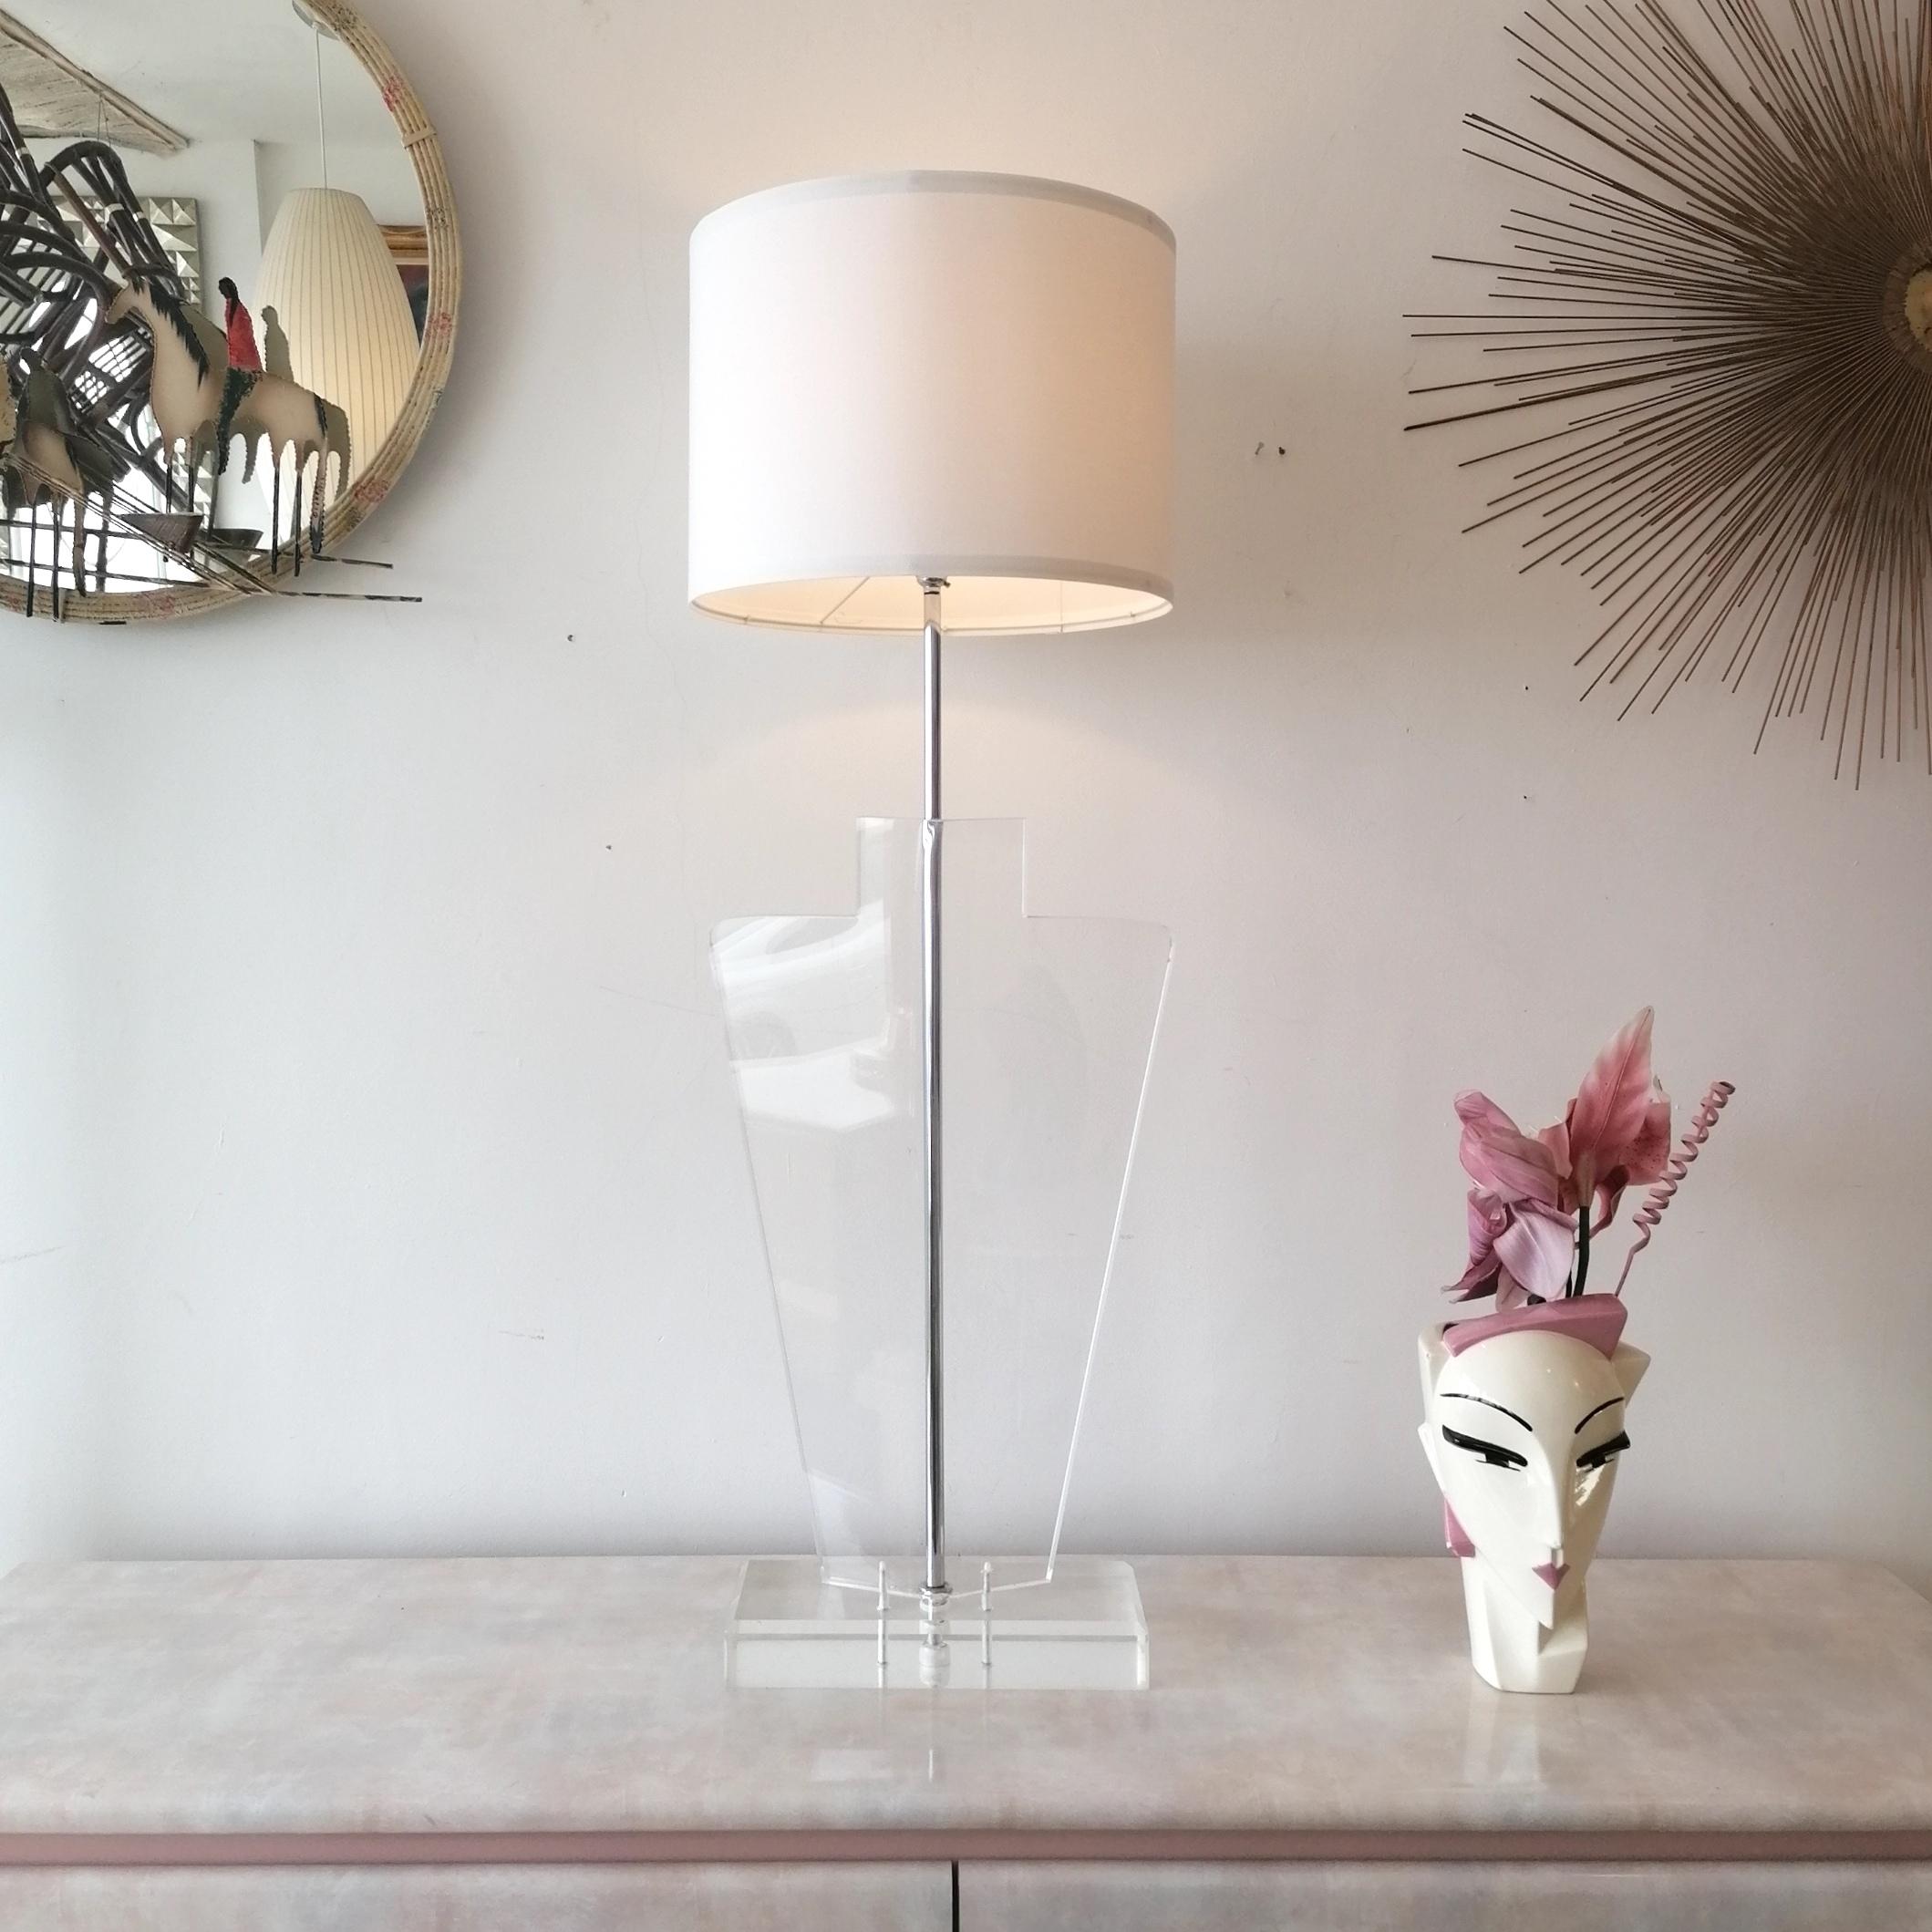 Pair of Very Large Vintage Architectural Lucite & Chrome Lamps, 1970s Italy 2